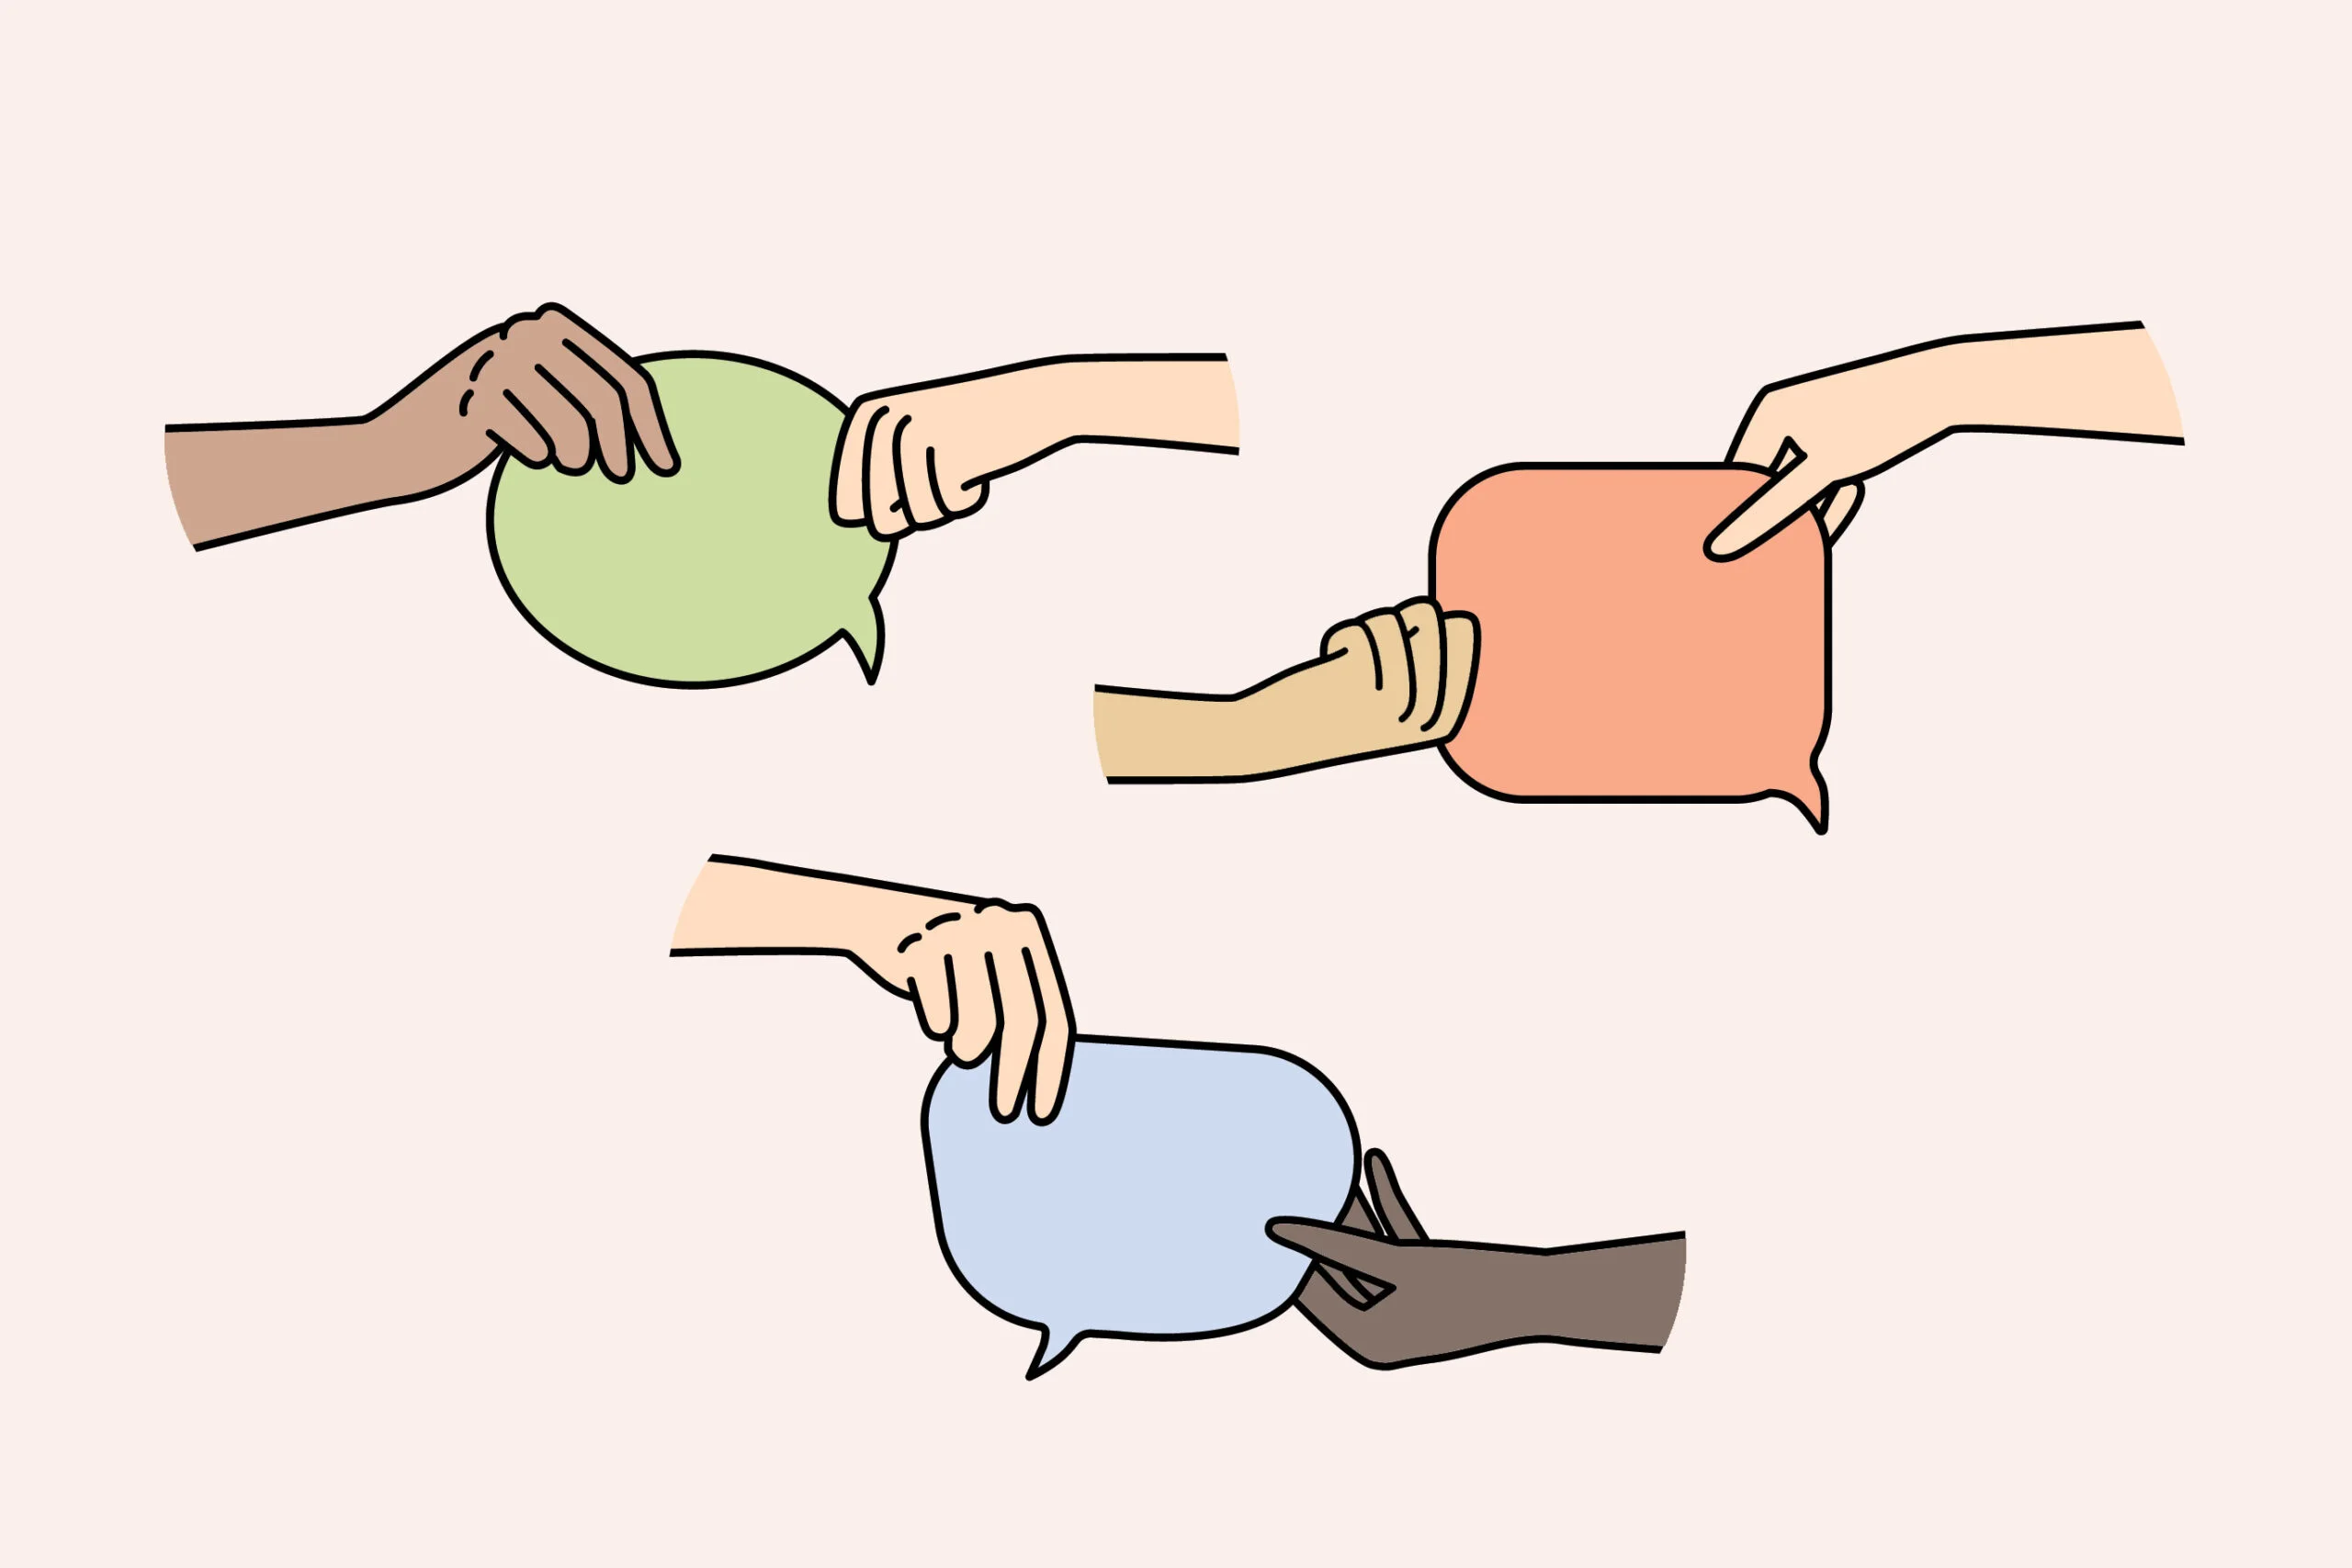 Illustration of Conversations Bubbles and Hands